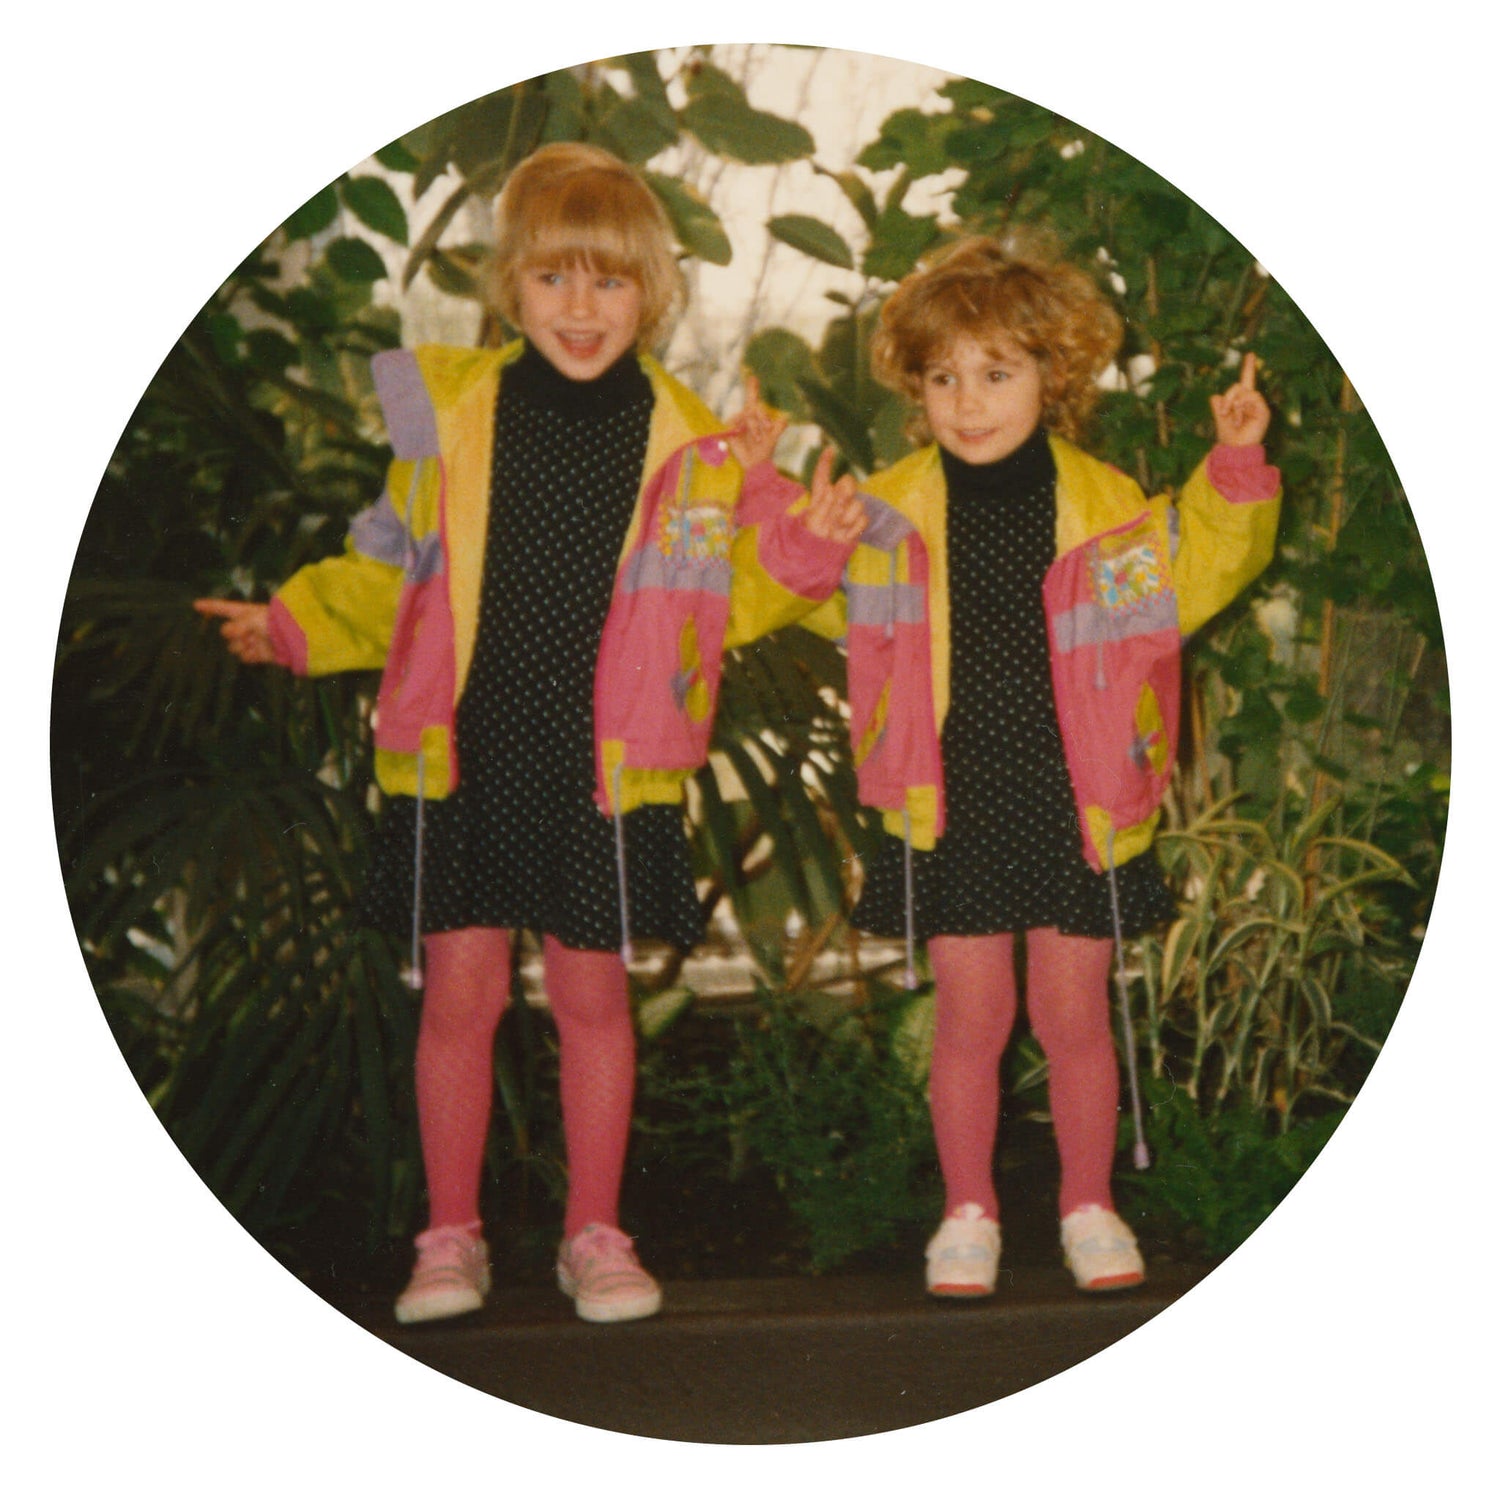 Two young girls, dressed in matching outfits, smiling while lifting their fingers in the air against a background of green plants.